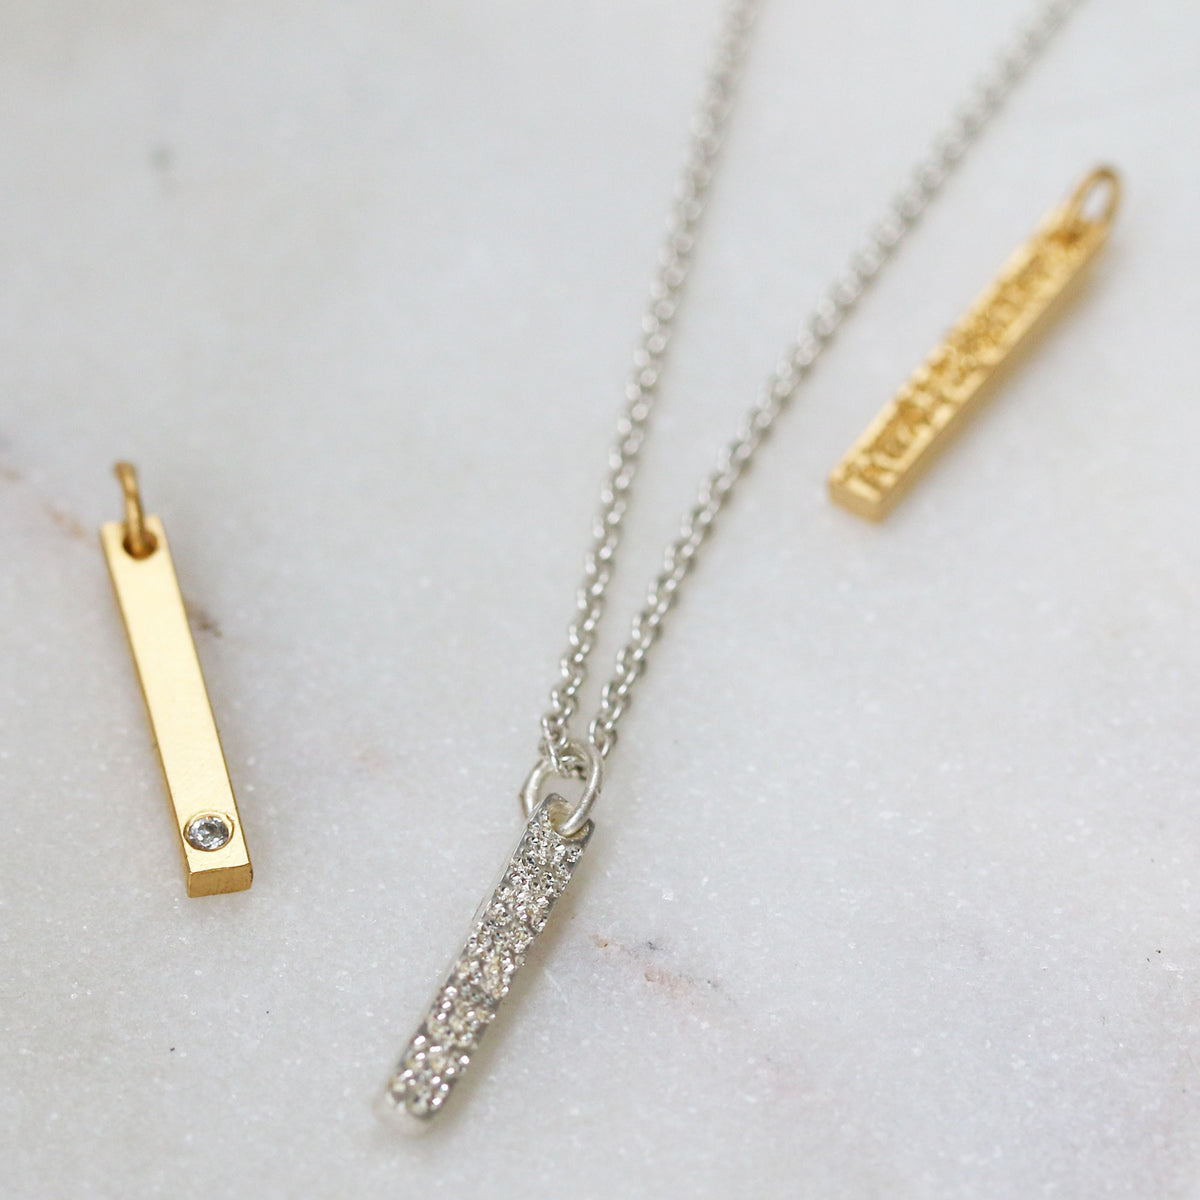 Never Struggle with Short Necklaces Again: Add an Extender Chain 